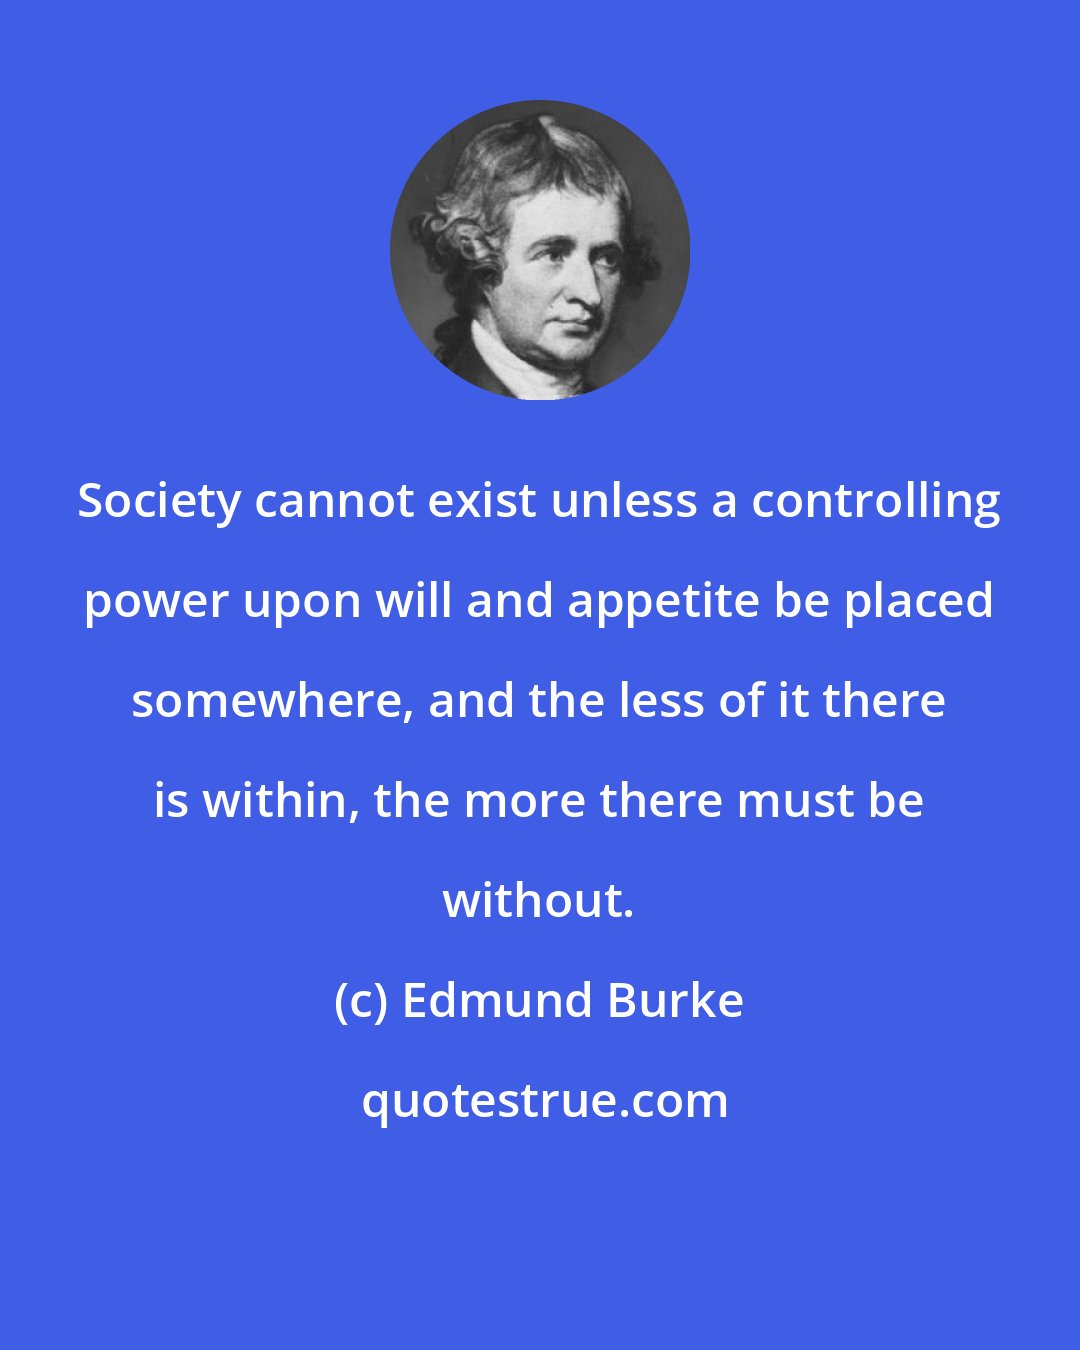 Edmund Burke: Society cannot exist unless a controlling power upon will and appetite be placed somewhere, and the less of it there is within, the more there must be without.